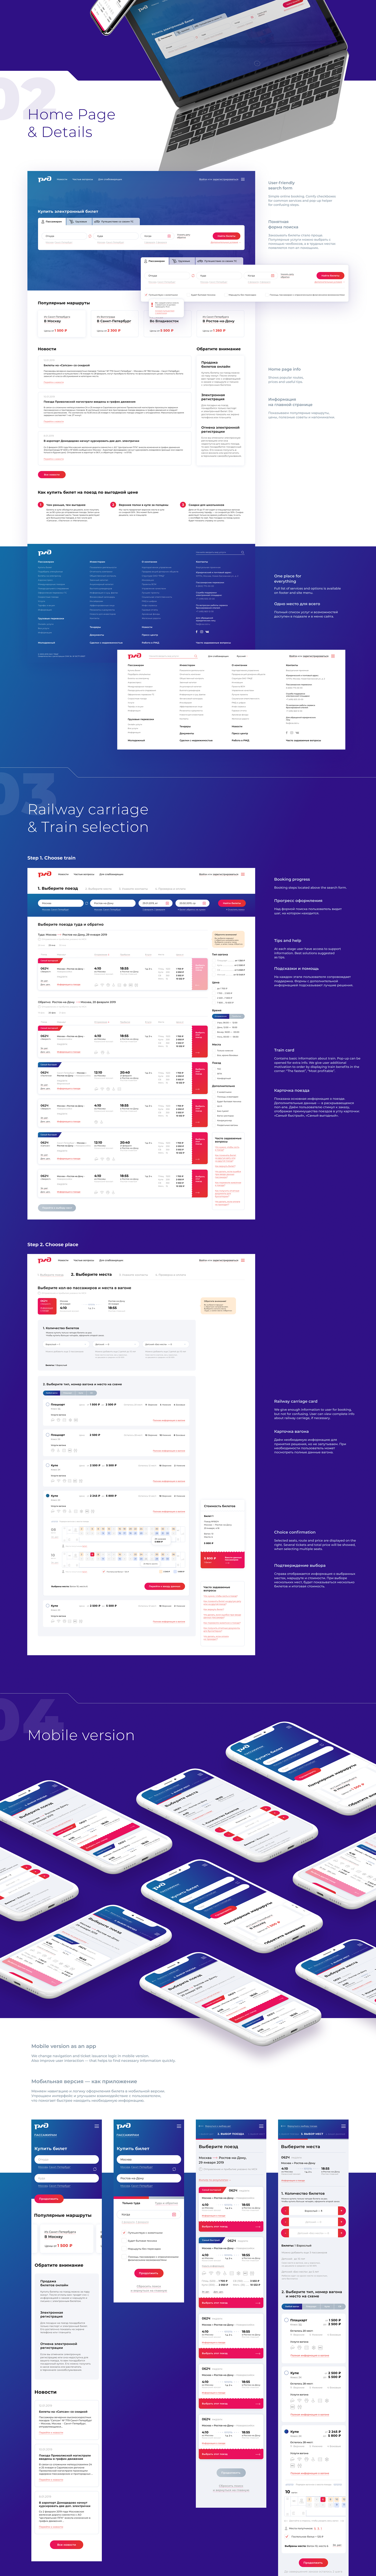 ticket train UI ux airplane app free Interface Booking system